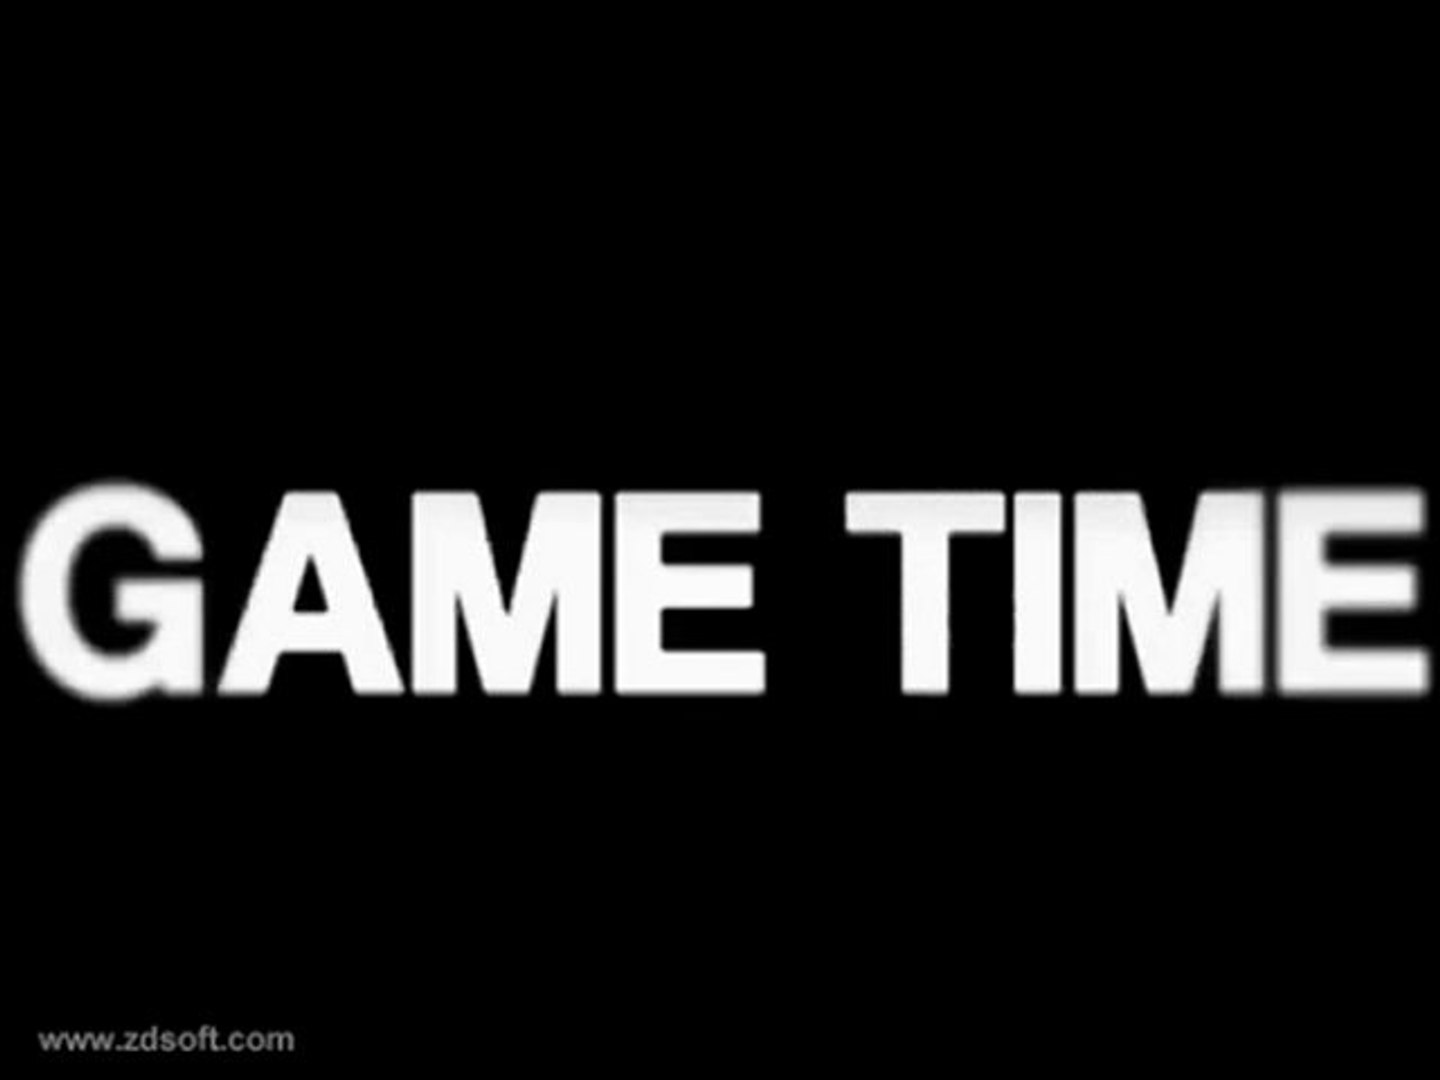 What time is it? It's Game Time!